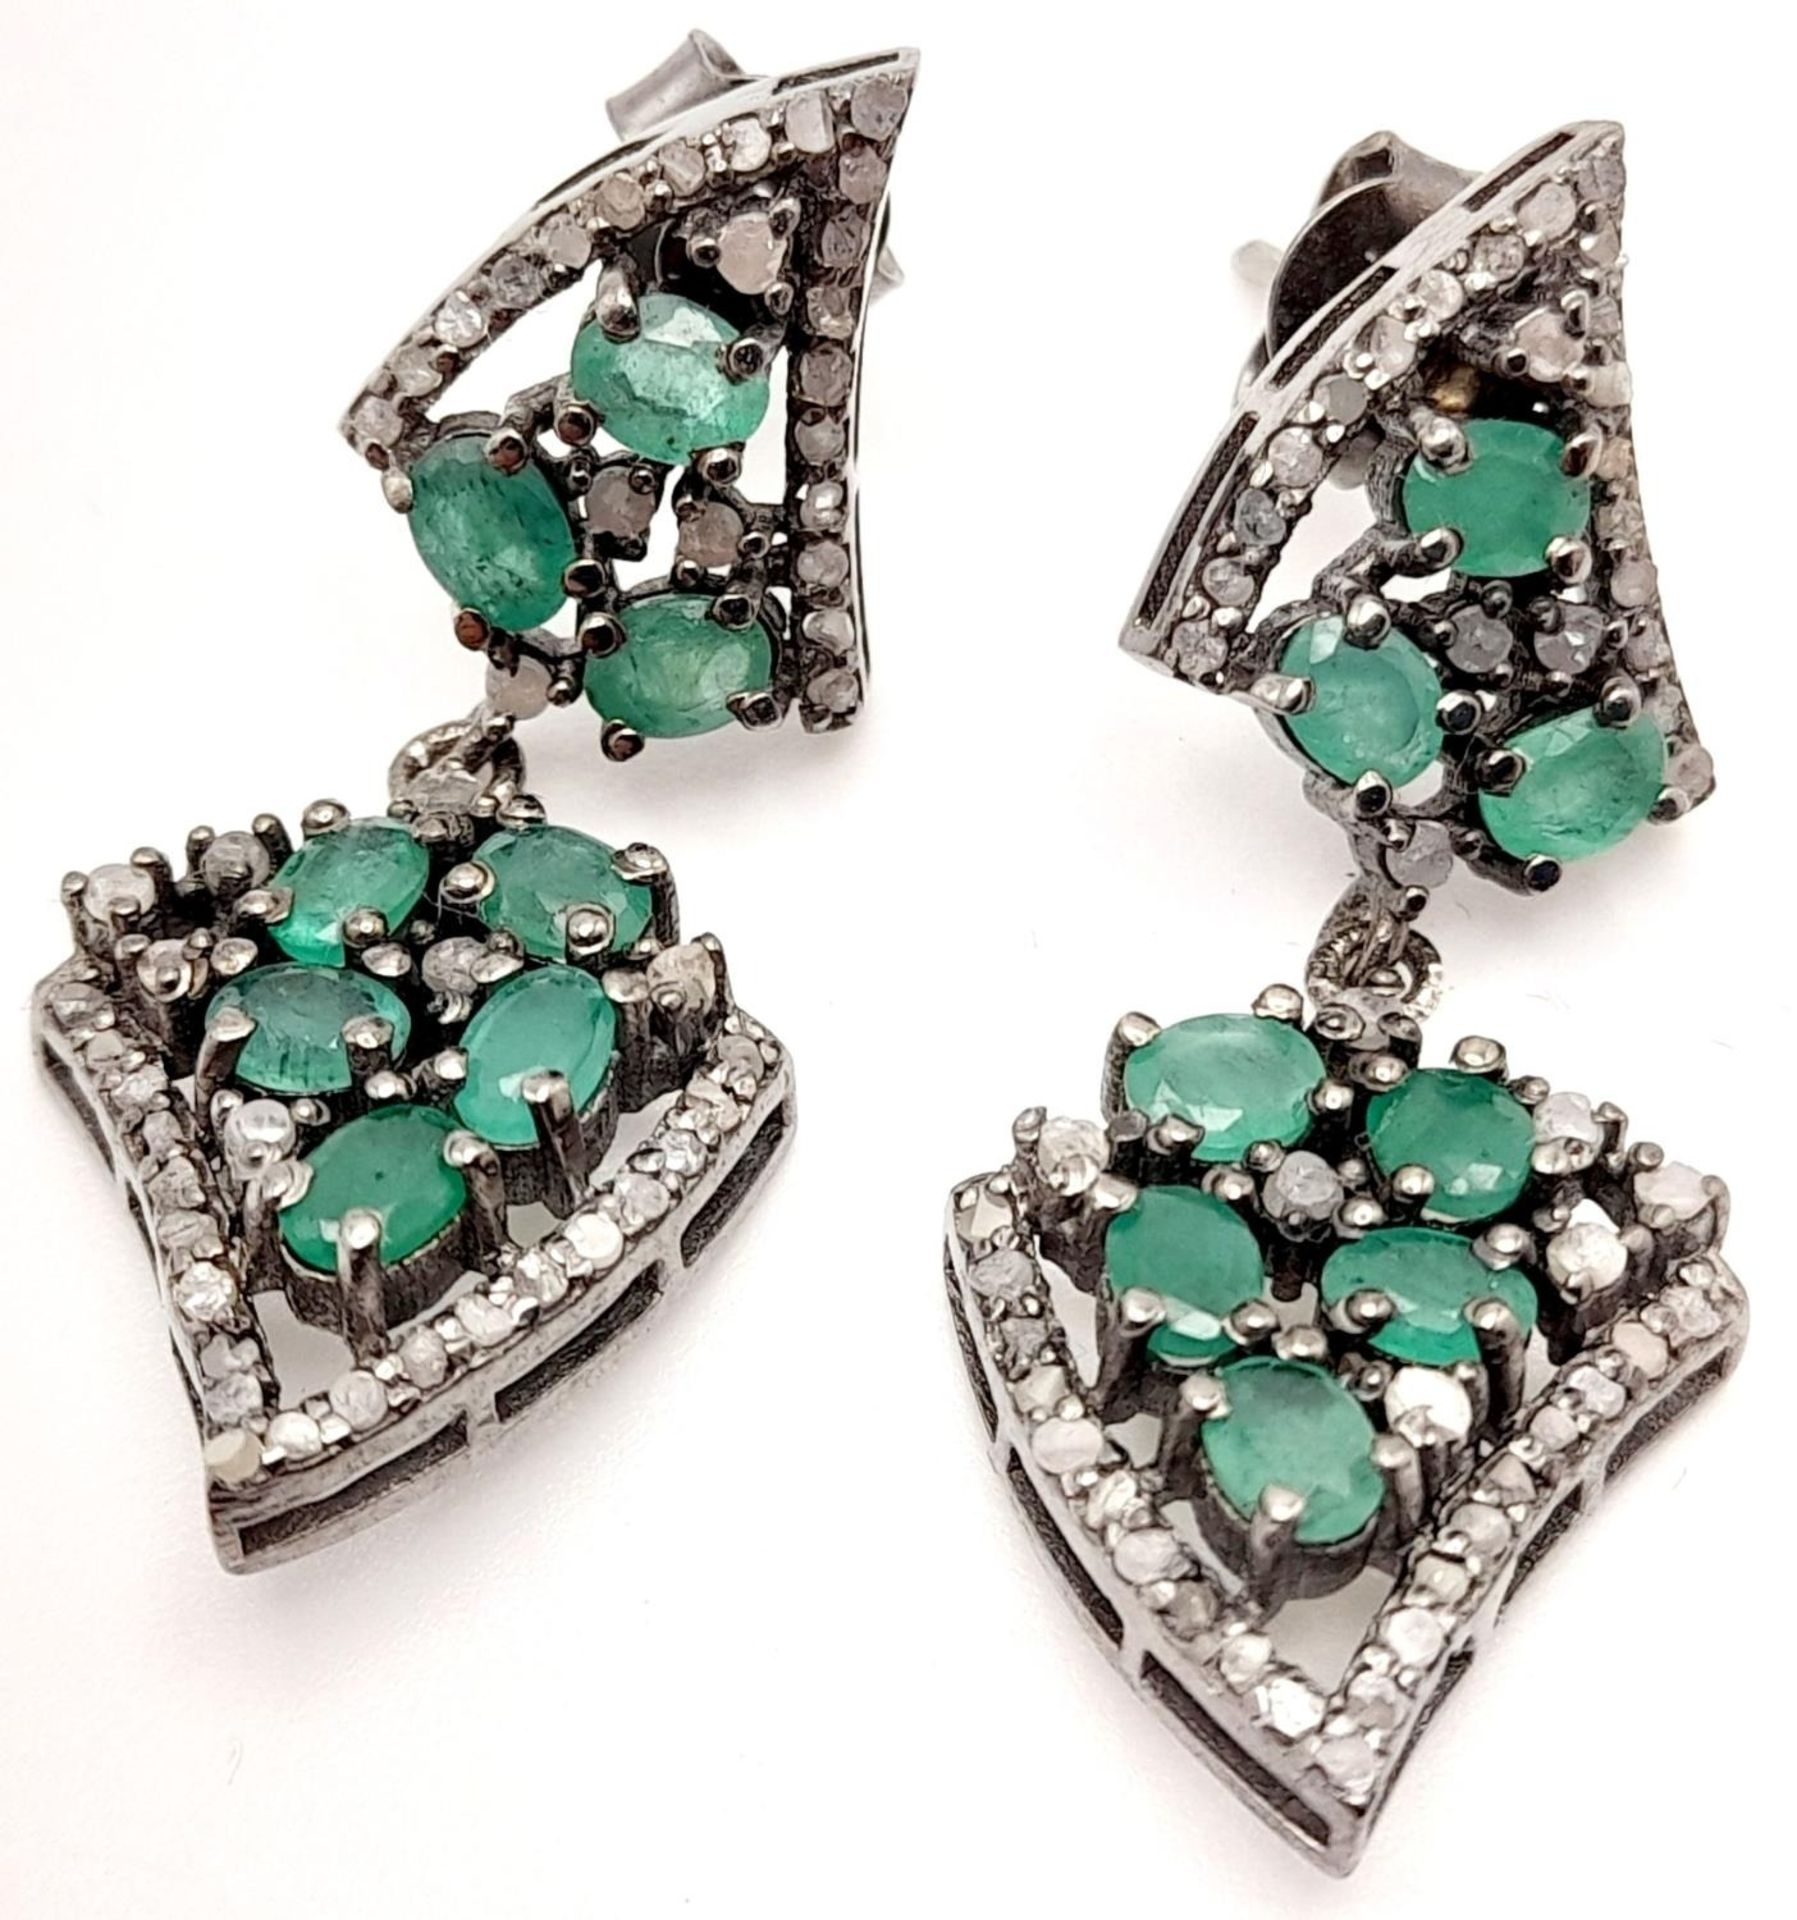 A beautiful Late Victorian or Edwardian pair of silver earrings with numerous old cut diamonds and - Bild 3 aus 5